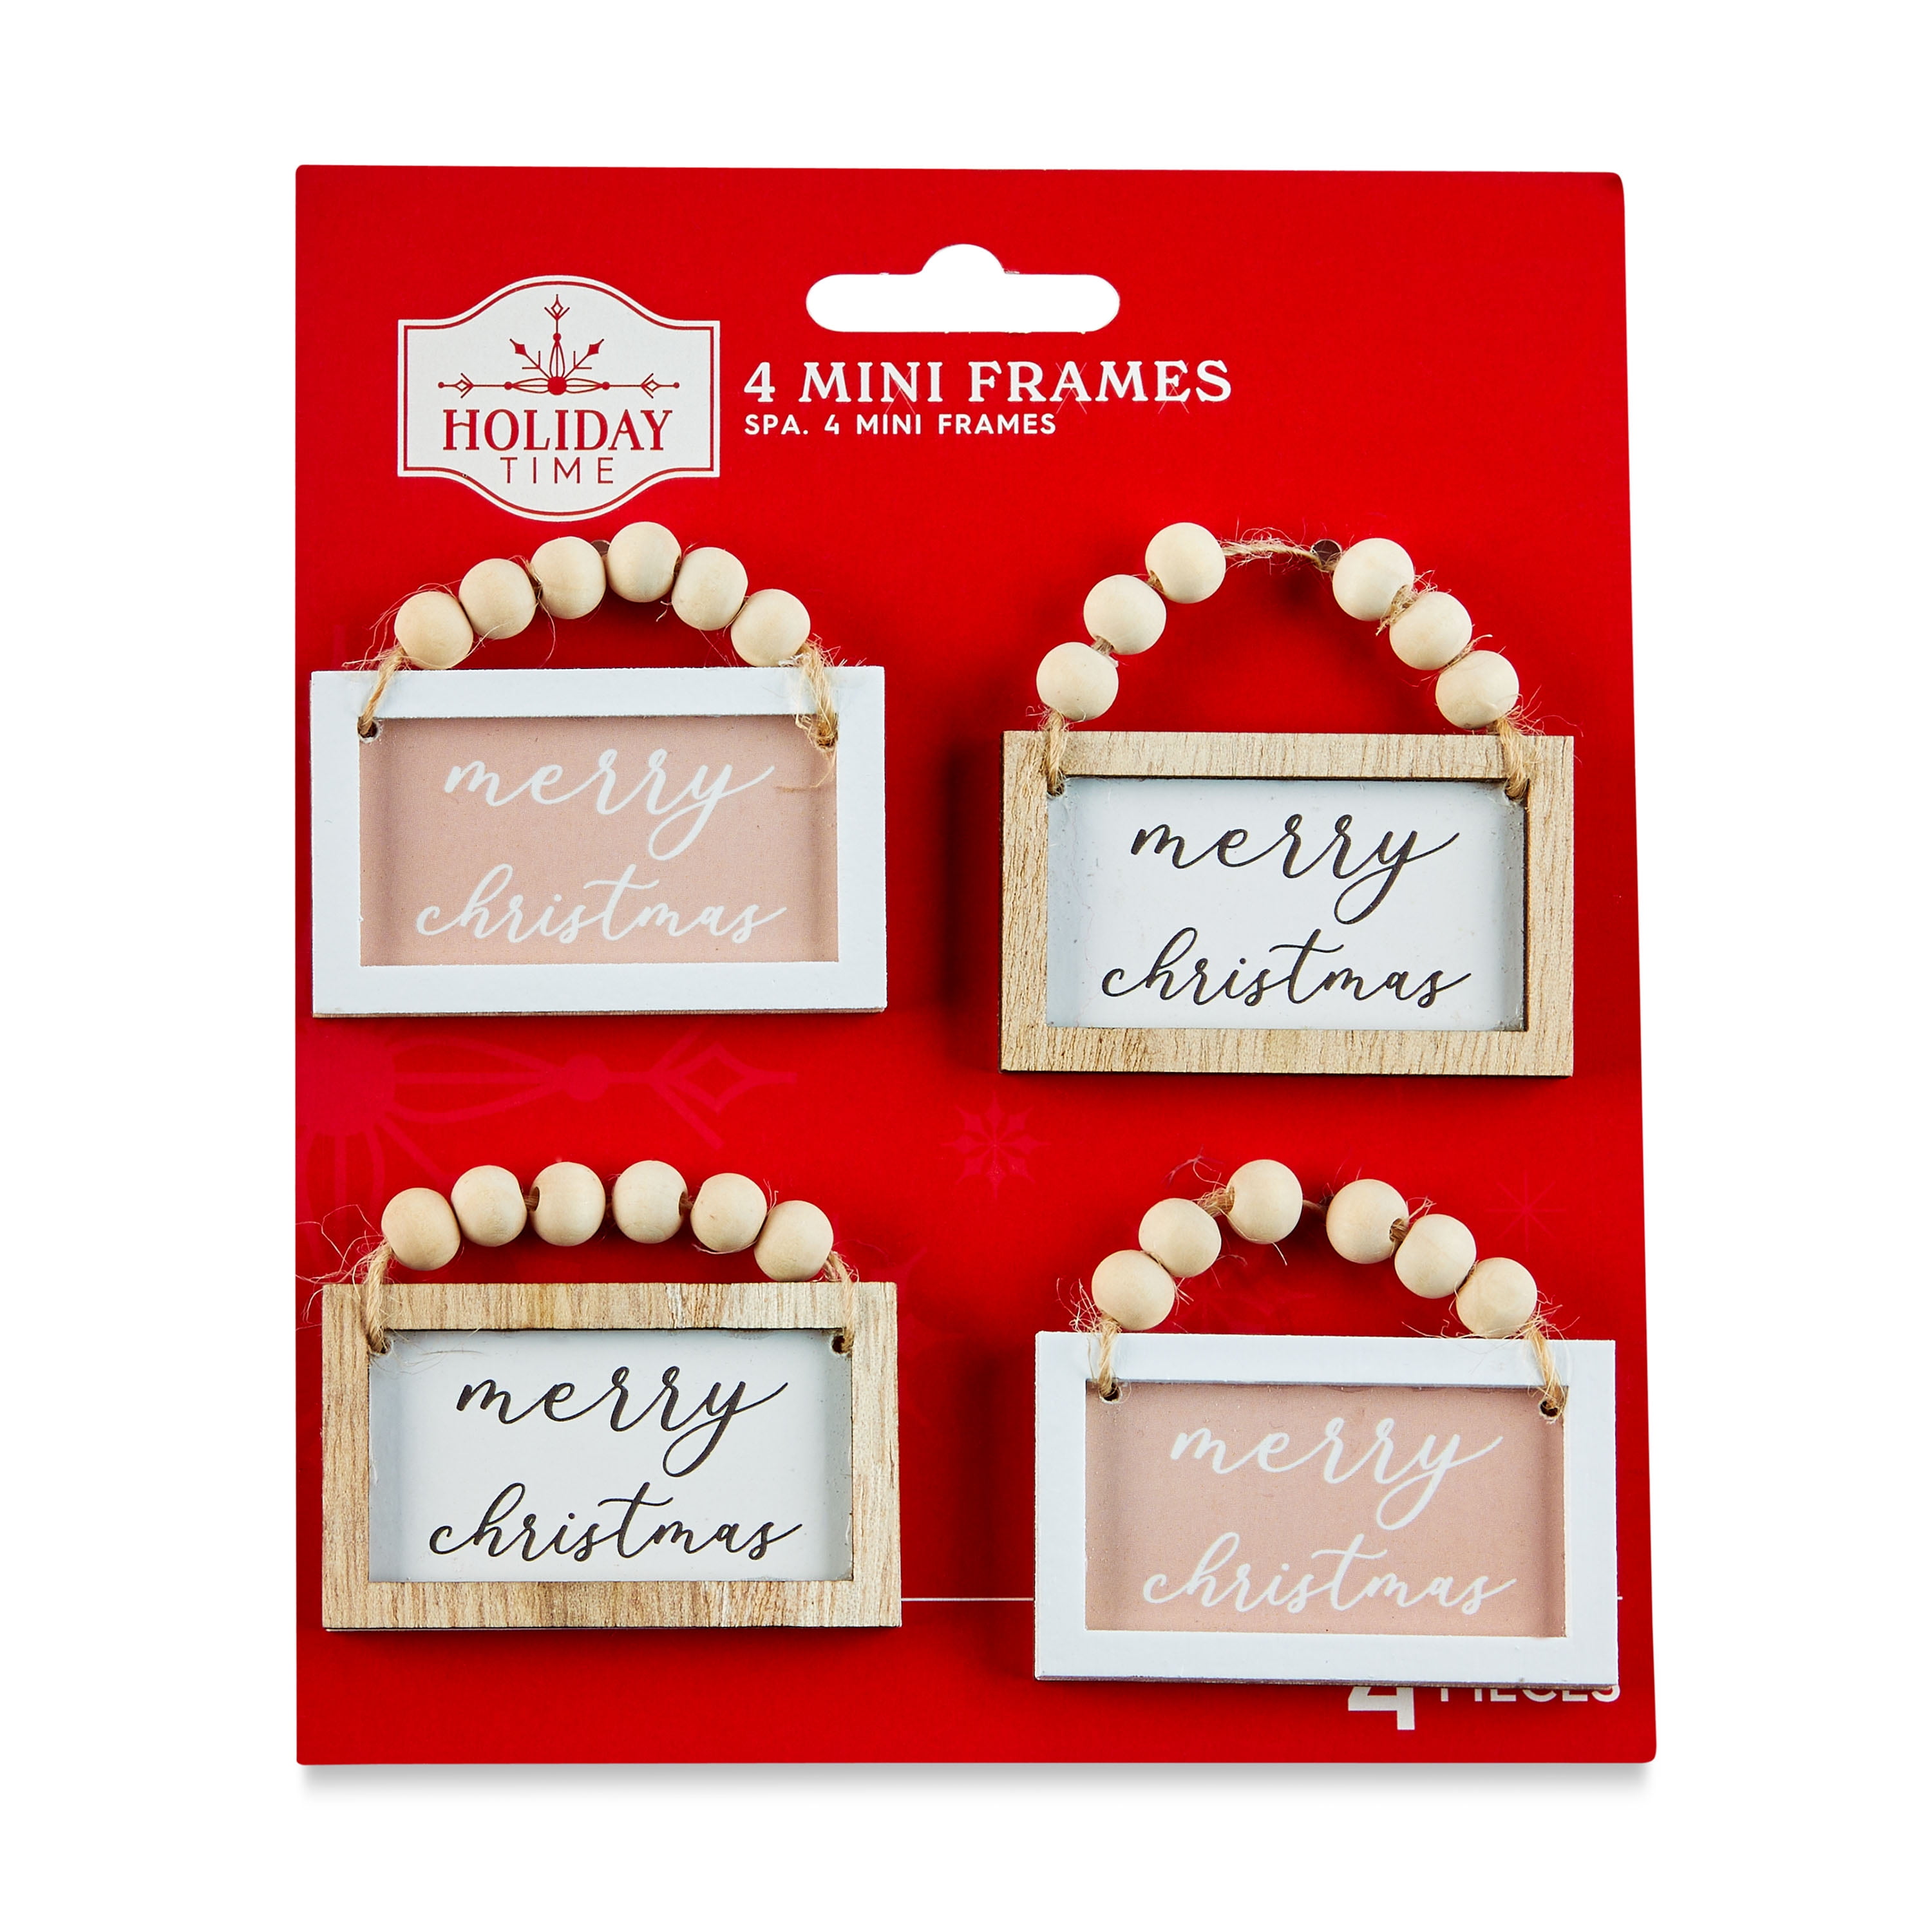 Holiday Time Blushful Pink and White Merry Christmas Mini Wood Frame Ornaments, Set of 4